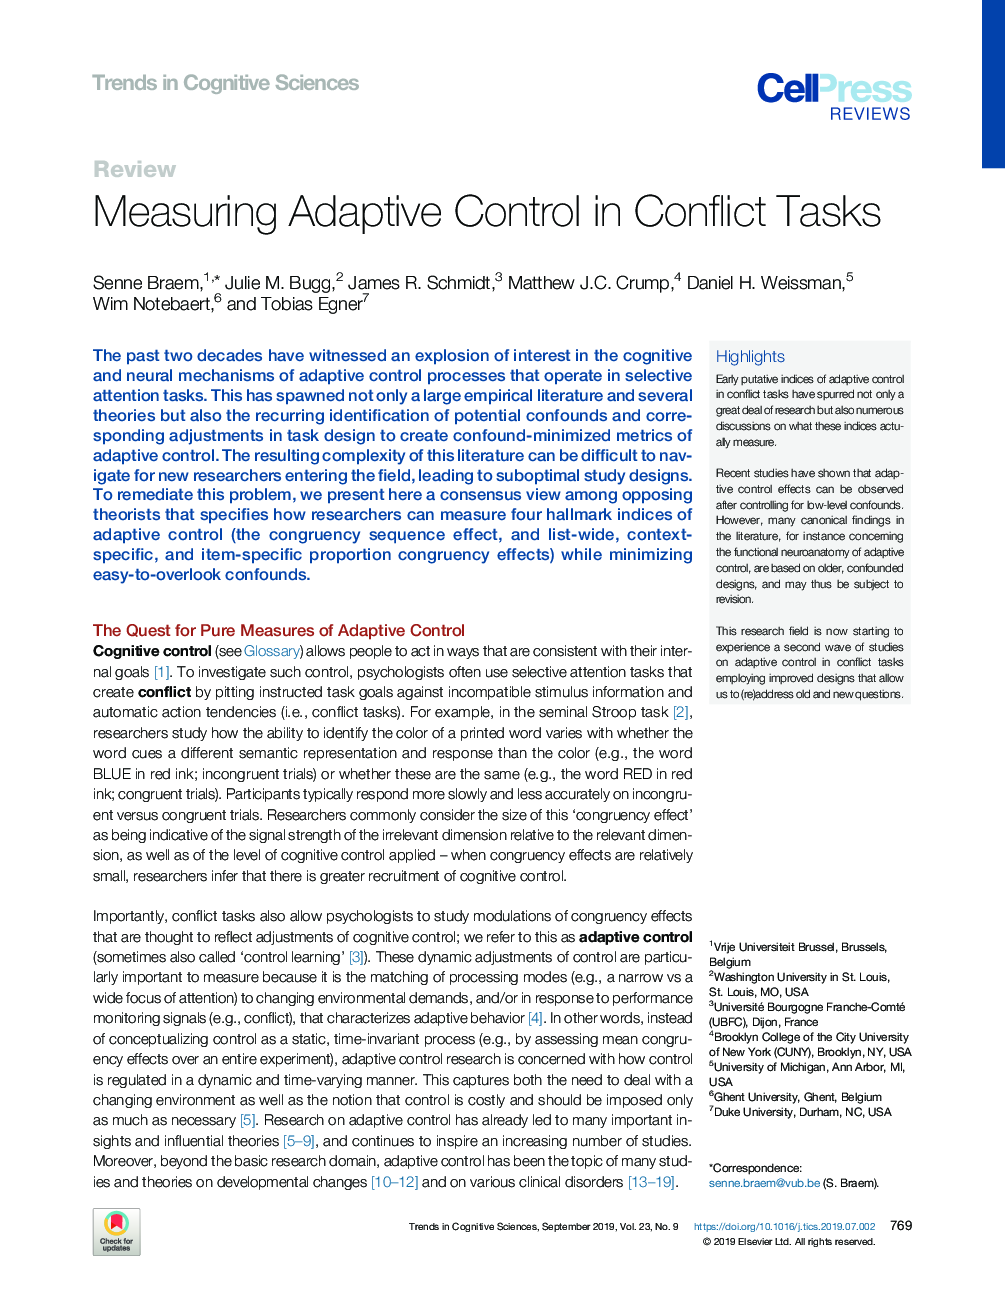 Measuring Adaptive Control in Conflict Tasks